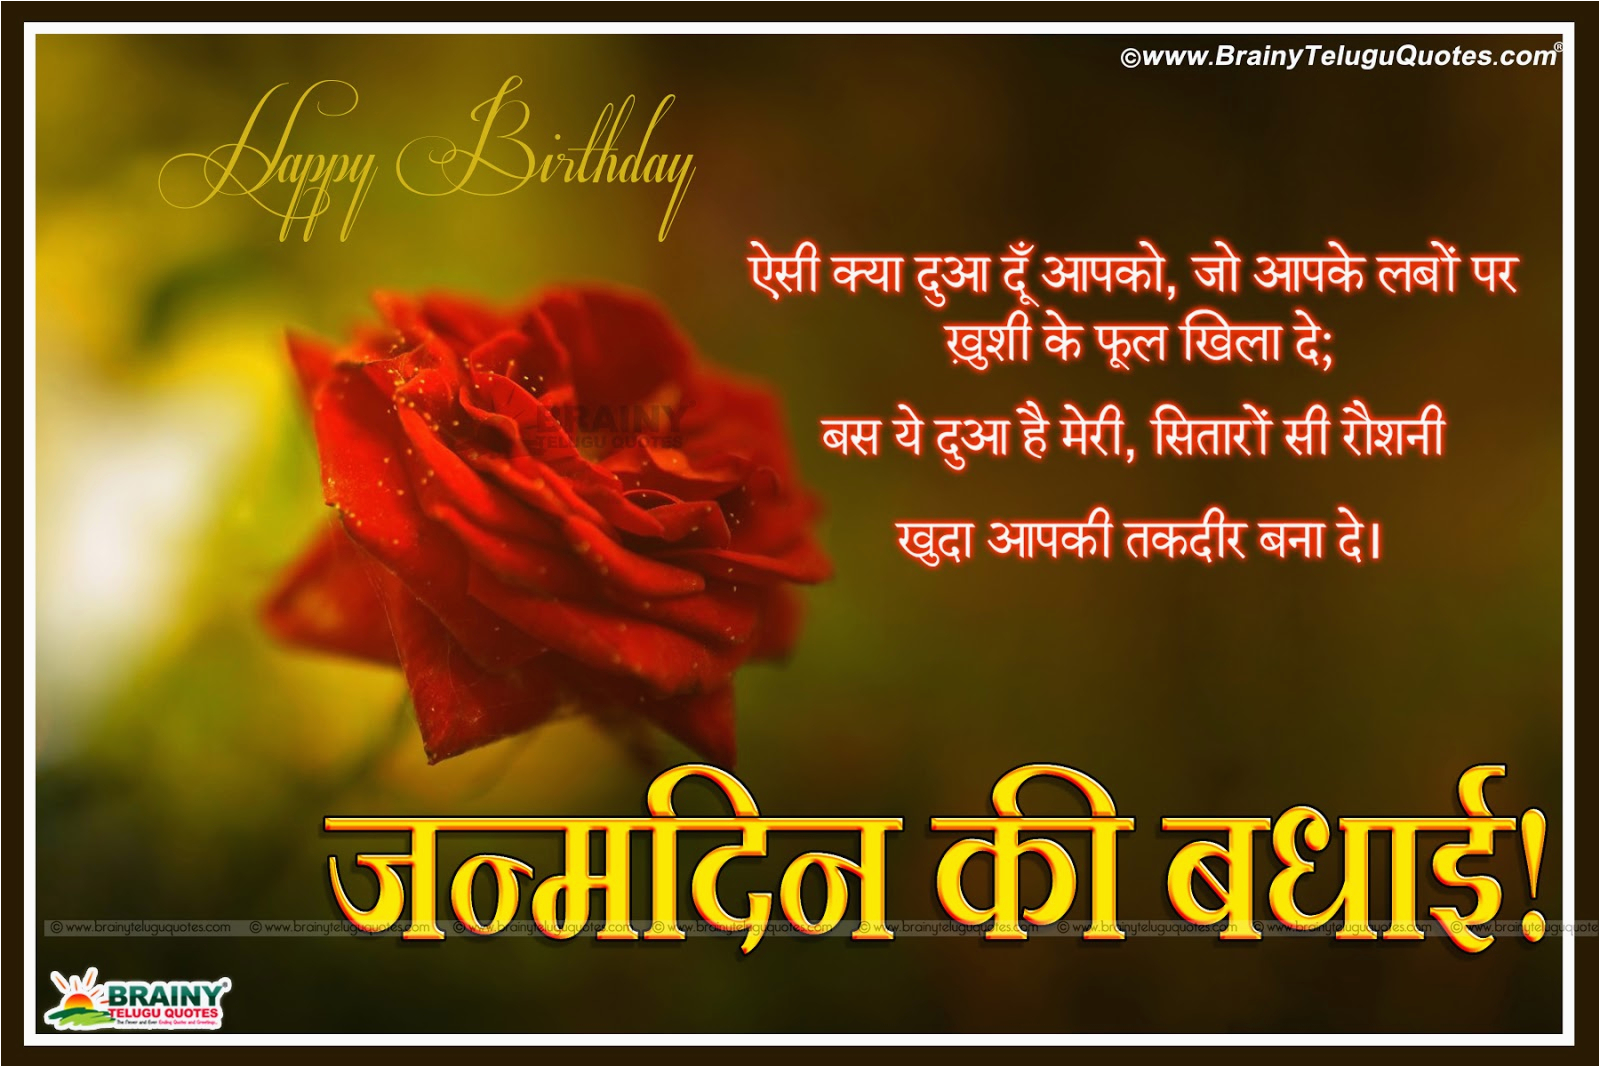 hindi birthday greetings wishes for friends lover family members